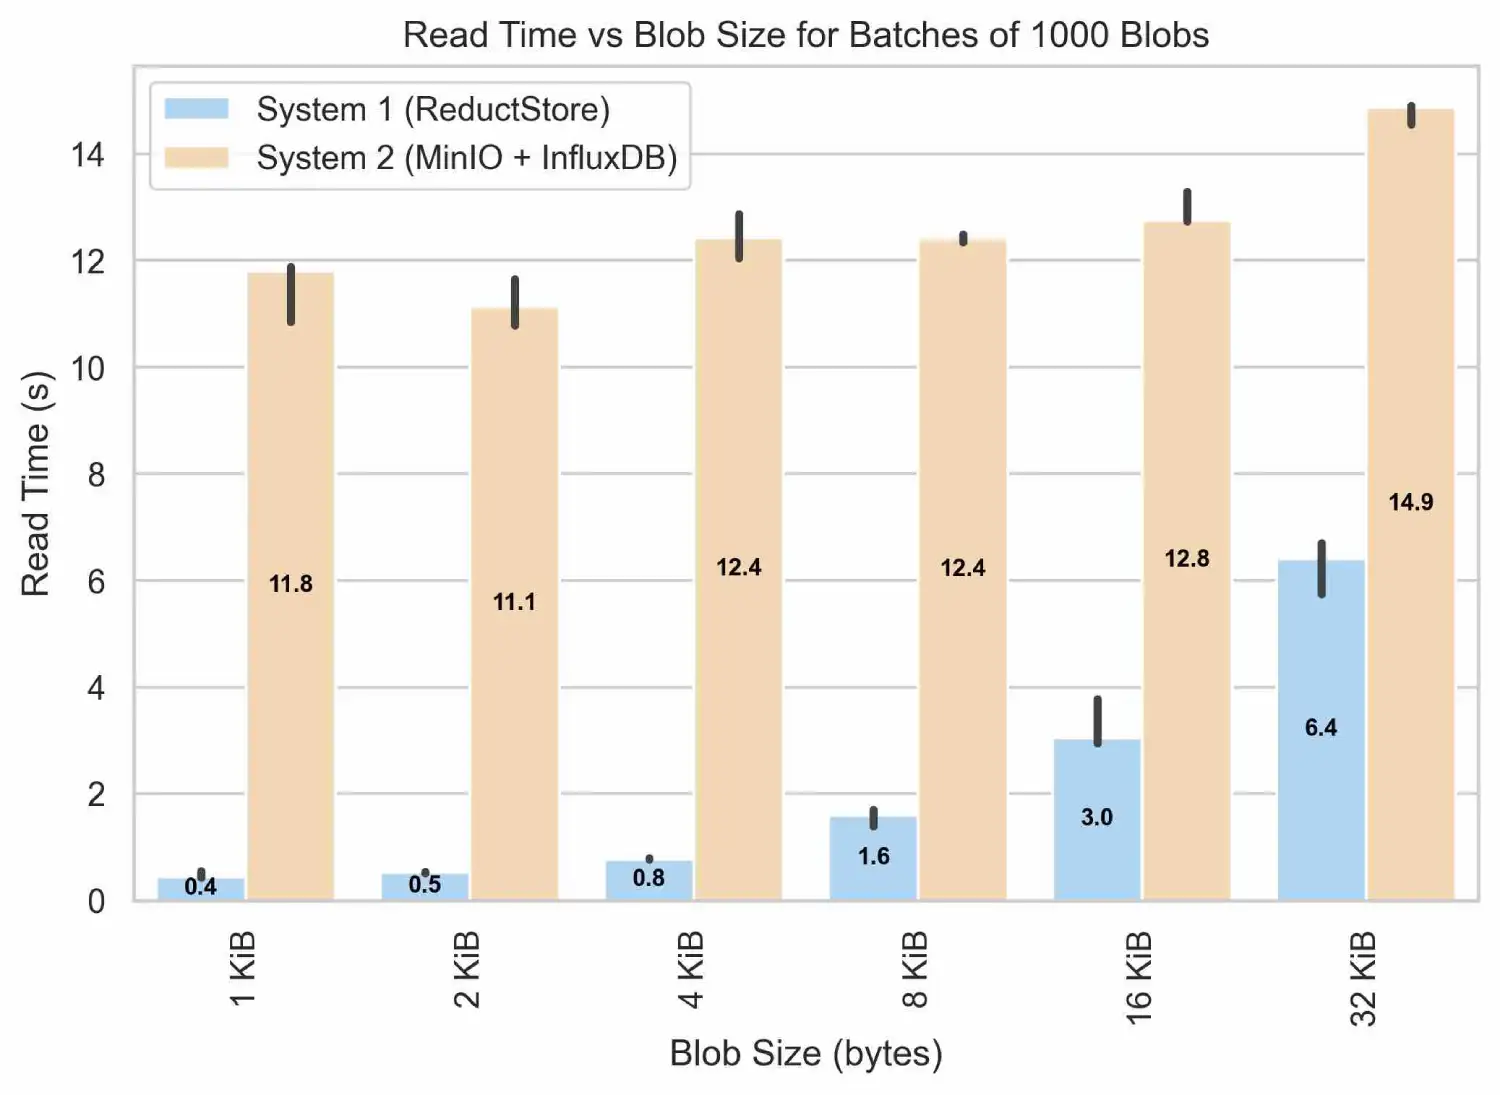 Read Time vs Blob Size for Batches of 1000 Blobs under 32 KiB